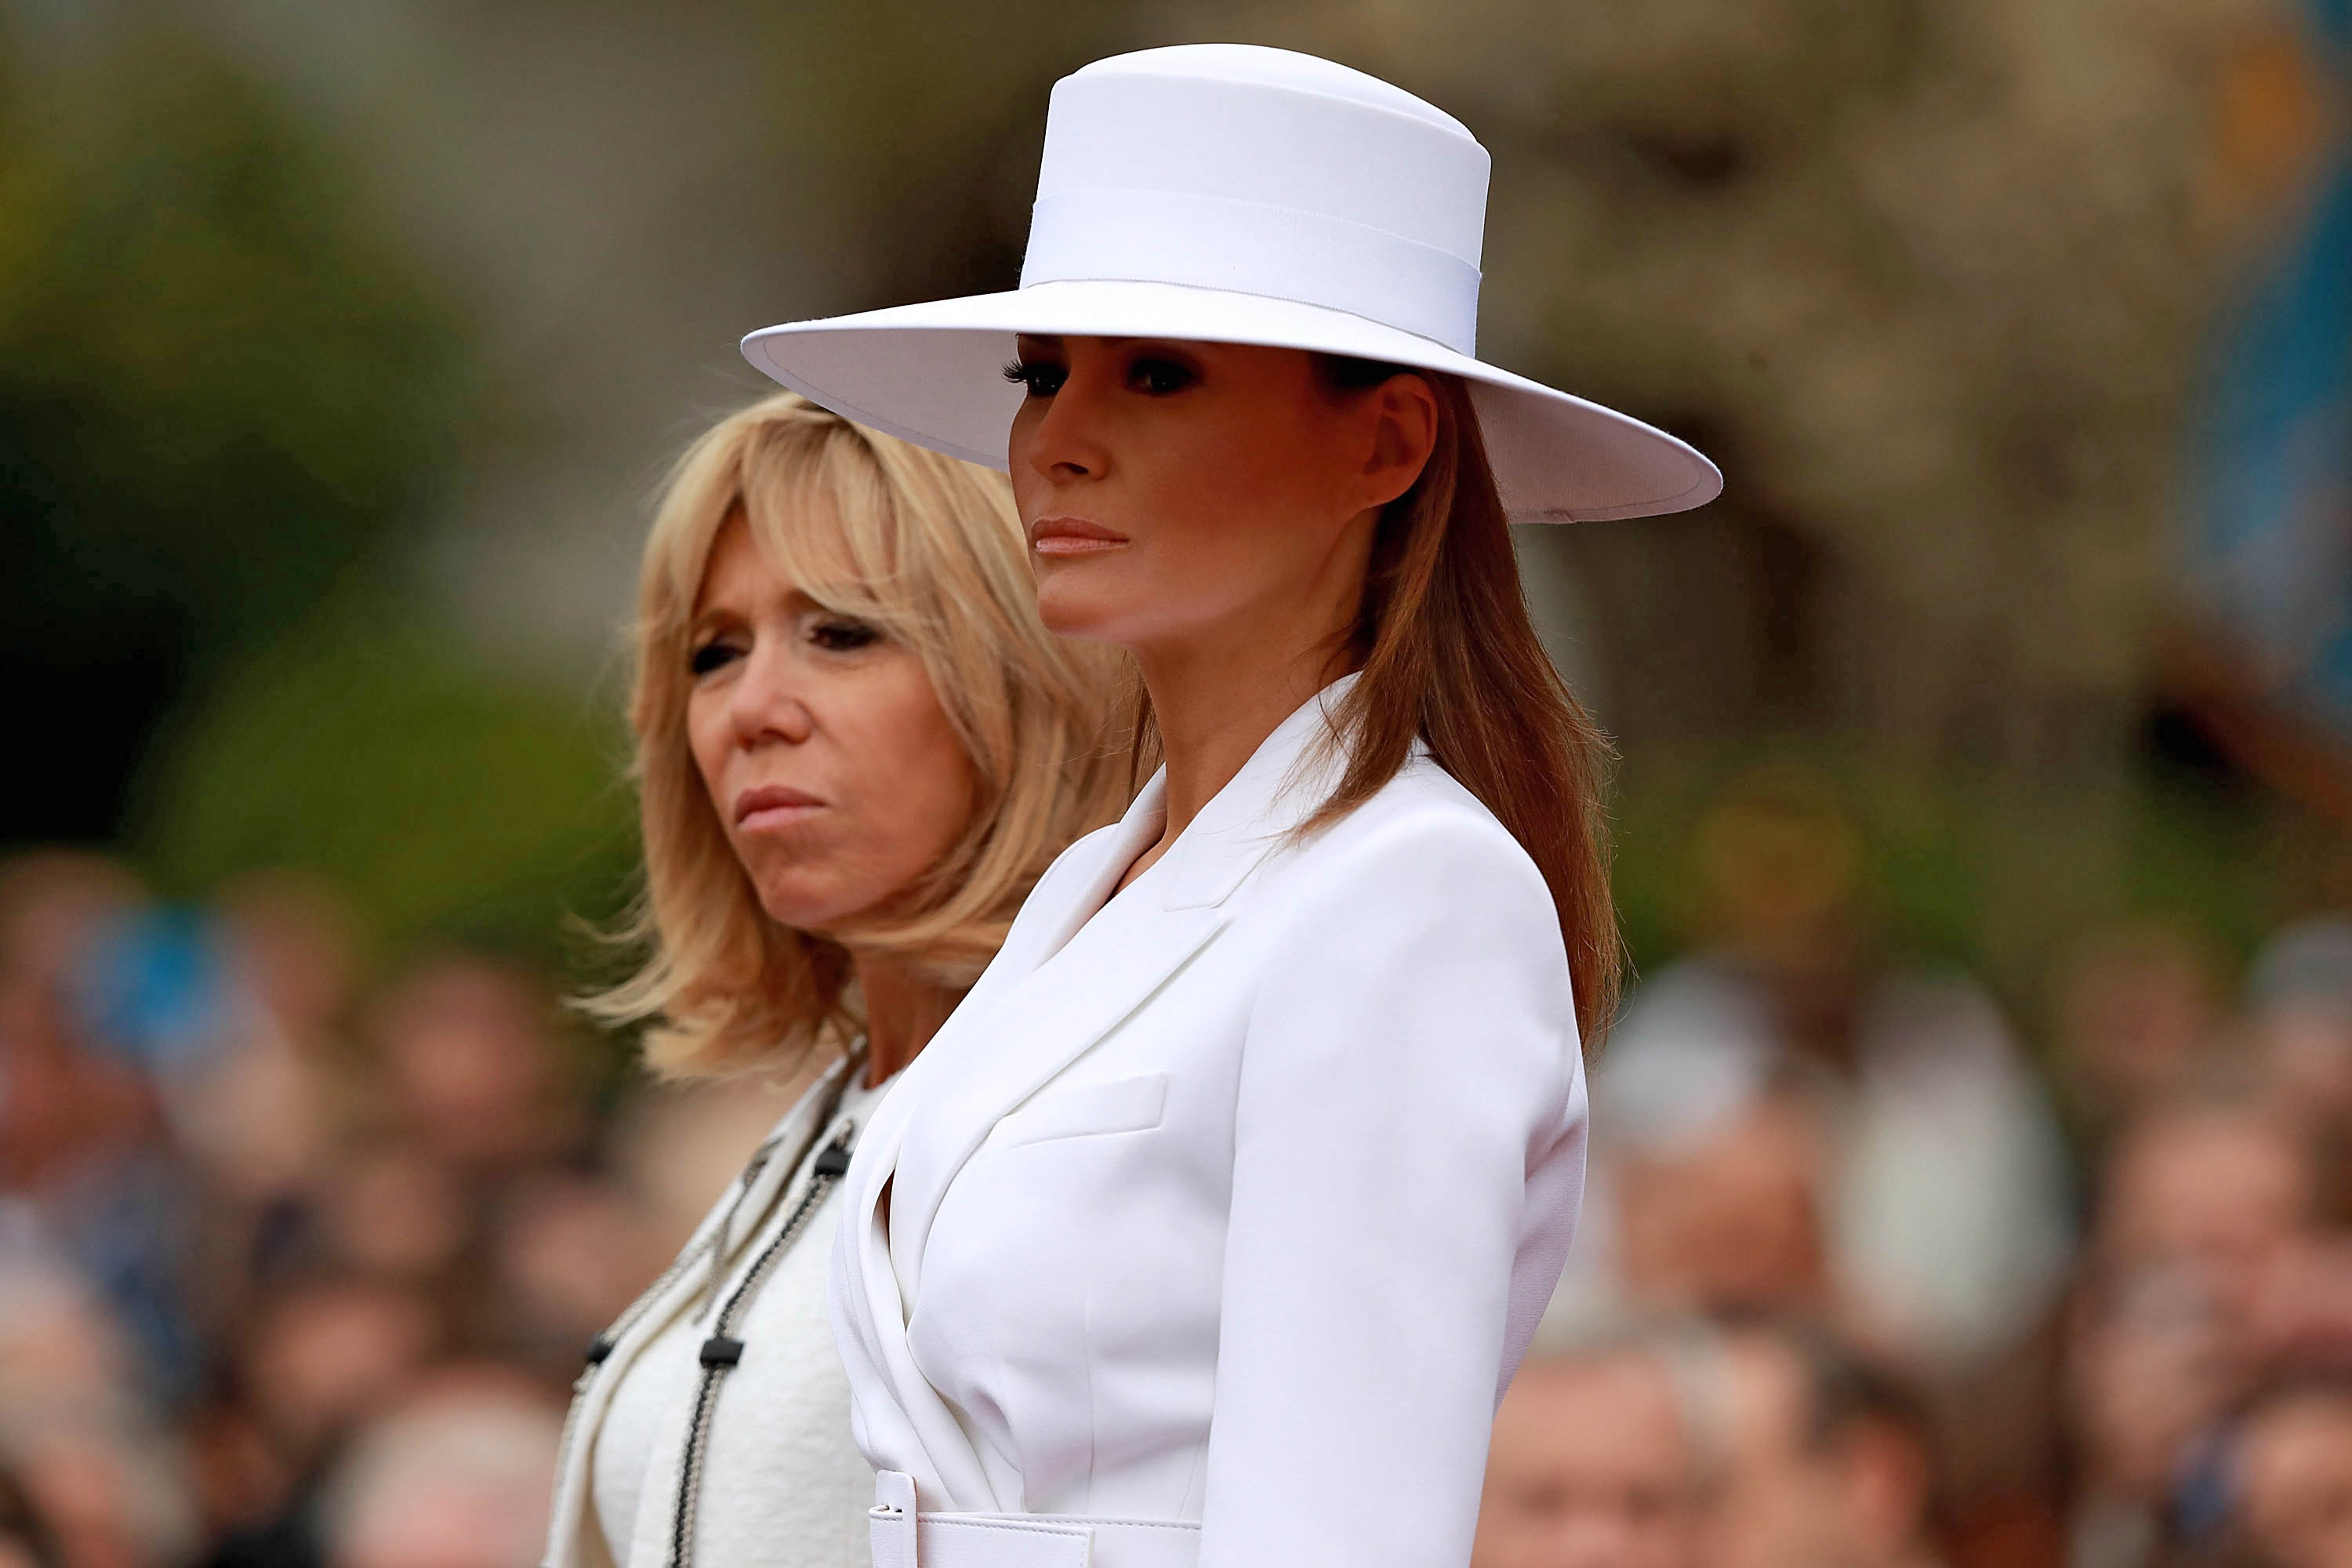 Armchair Fashionistas Had Takes on Melania's Giant Hat: Like 'She Has an  Entire Birdcage' Under There